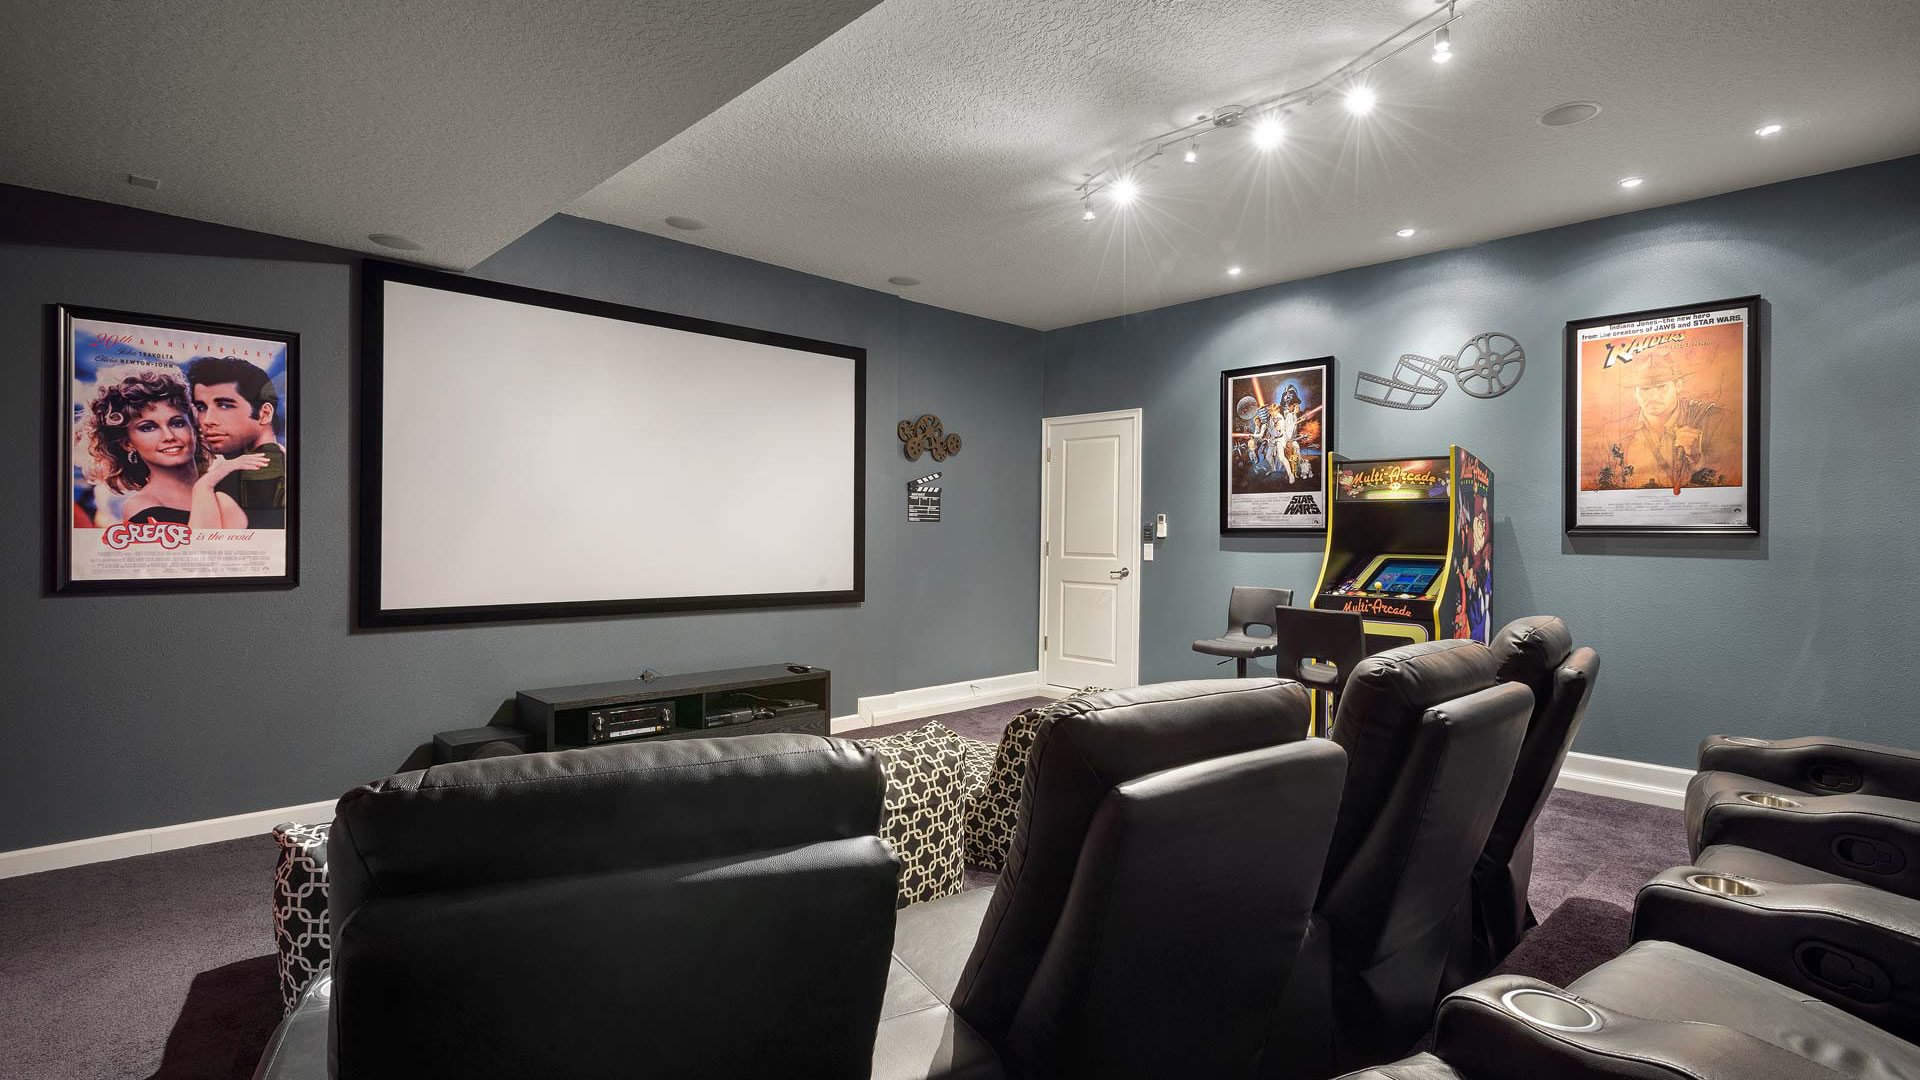 Theater Room Downstairs
Blu-Ray Xbox 360
PlayStation 4
Video Arcade